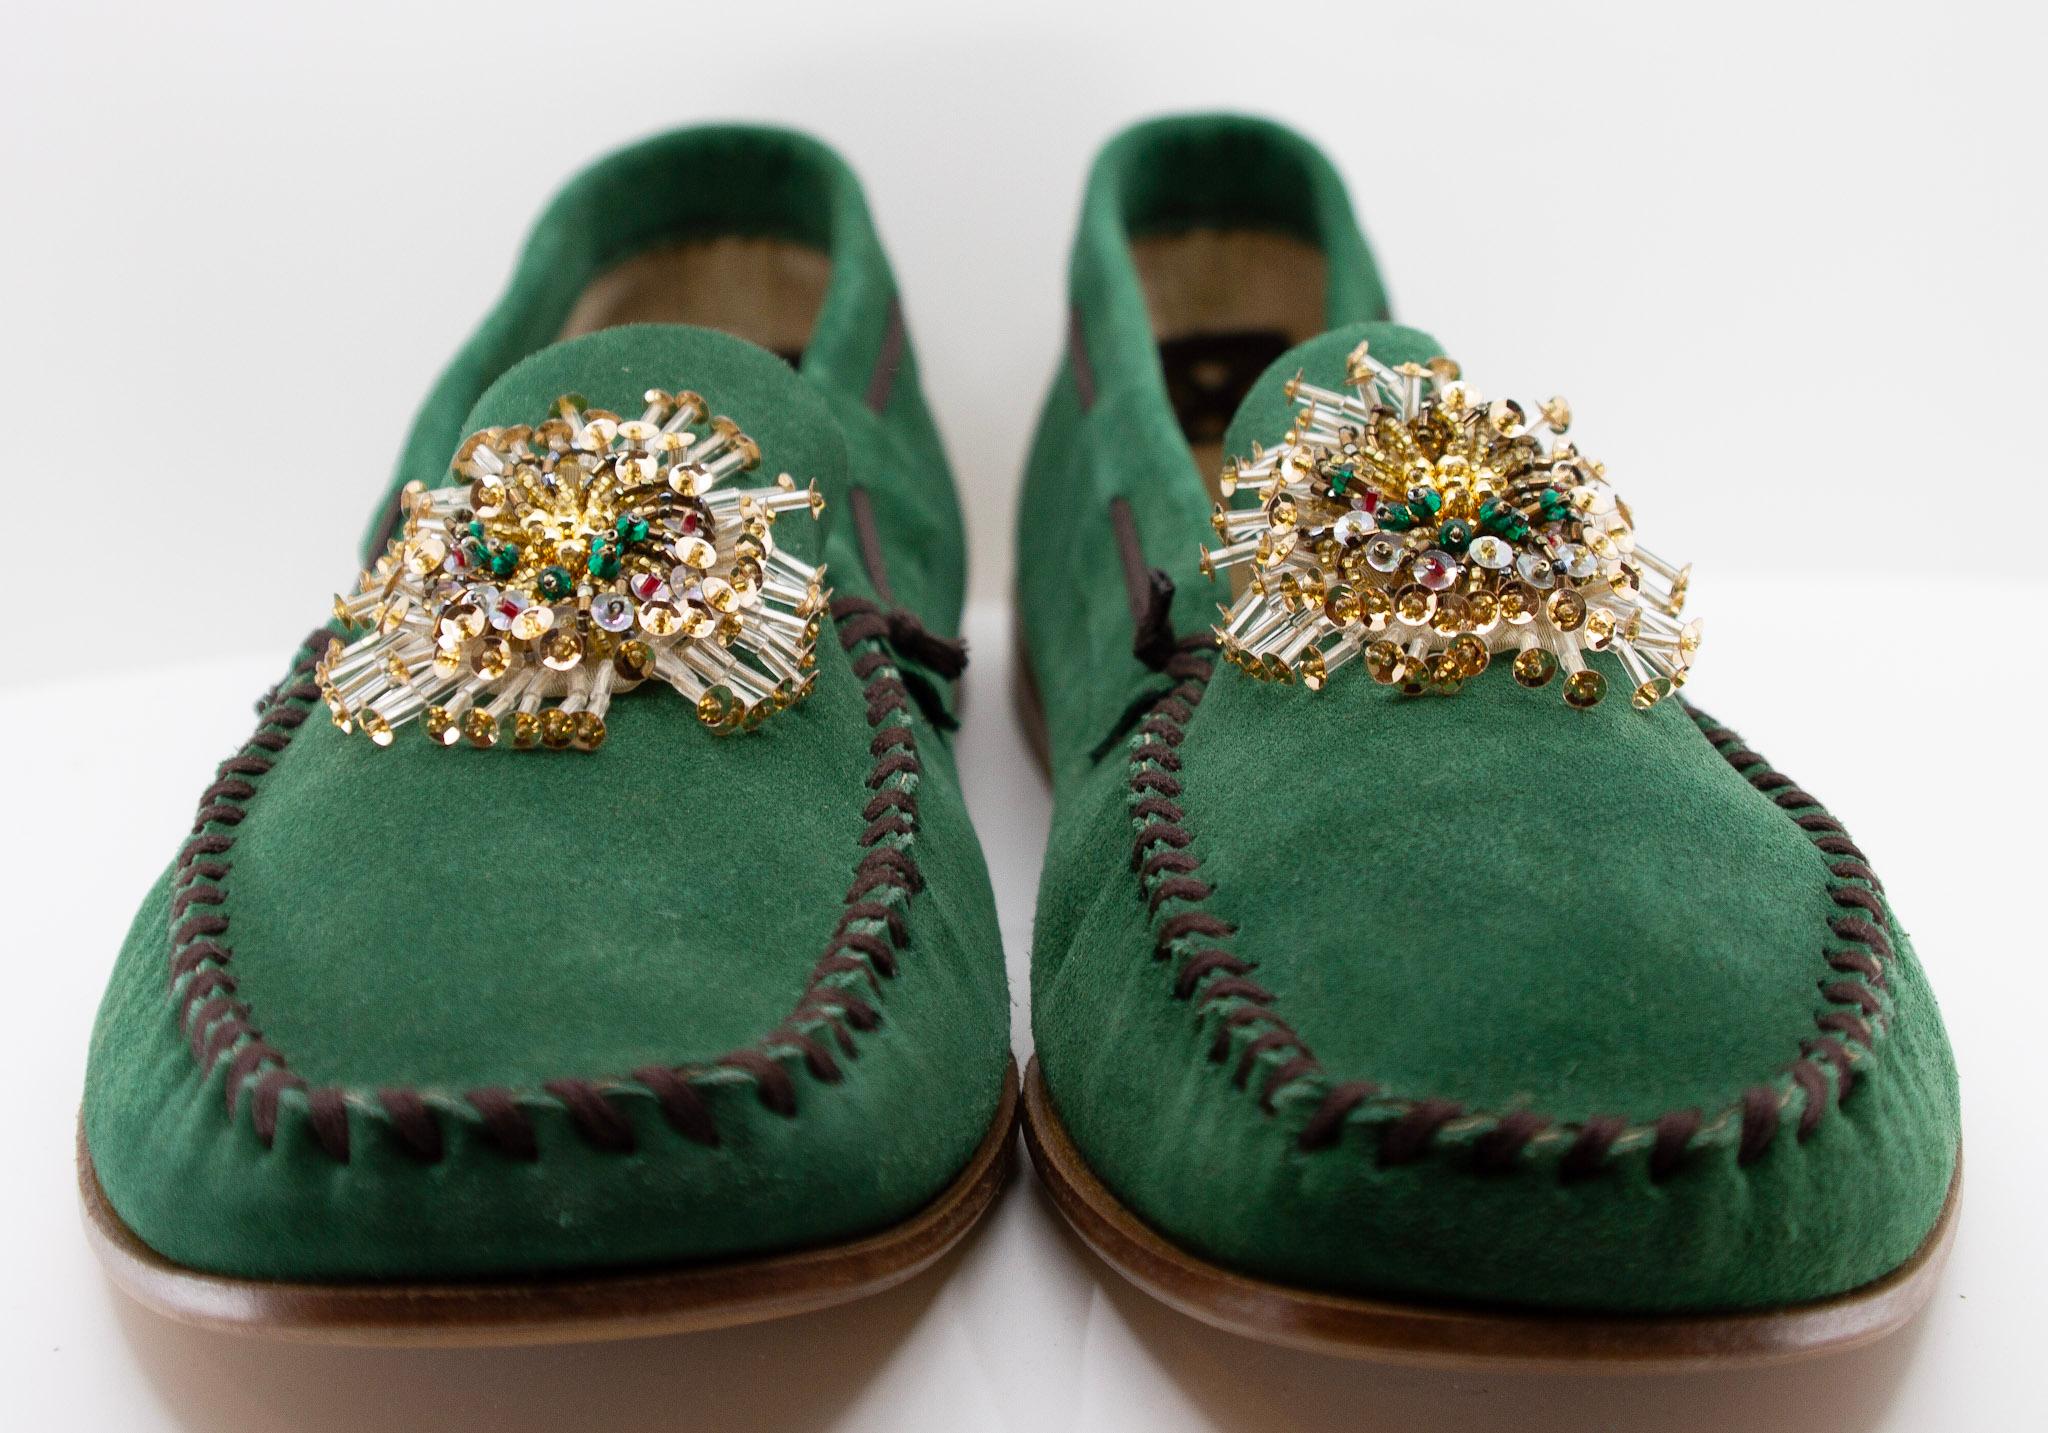 PRADA, emerald green, suede, loafers with beaded embellishments and leather soles, Estate of André Leon Talley.

New condition.

Given to André Leon Talley by Prada, never worn.

Size 14